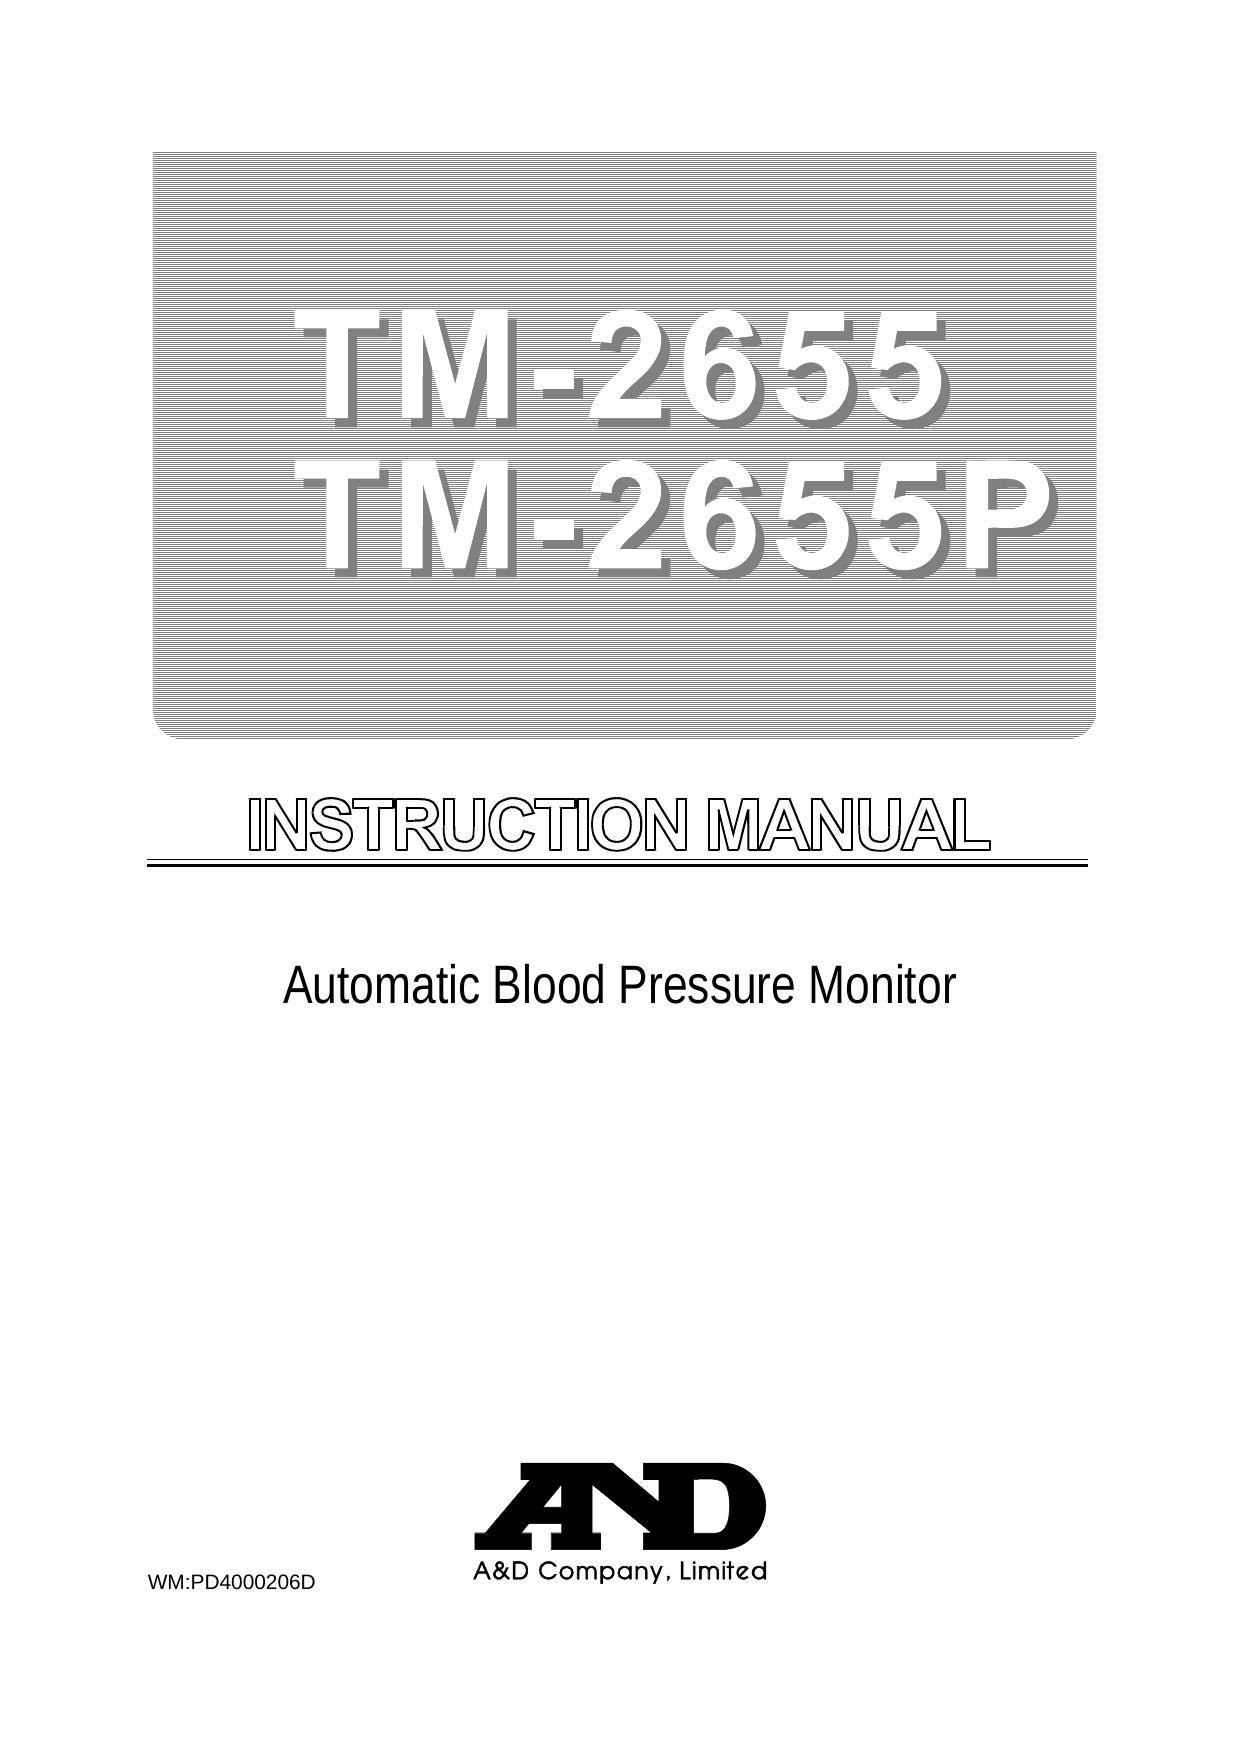 instruction-manual-for-ad-company-limited-tm-2655-tm2655p-automatic-blood-pressure-monitor.pdf